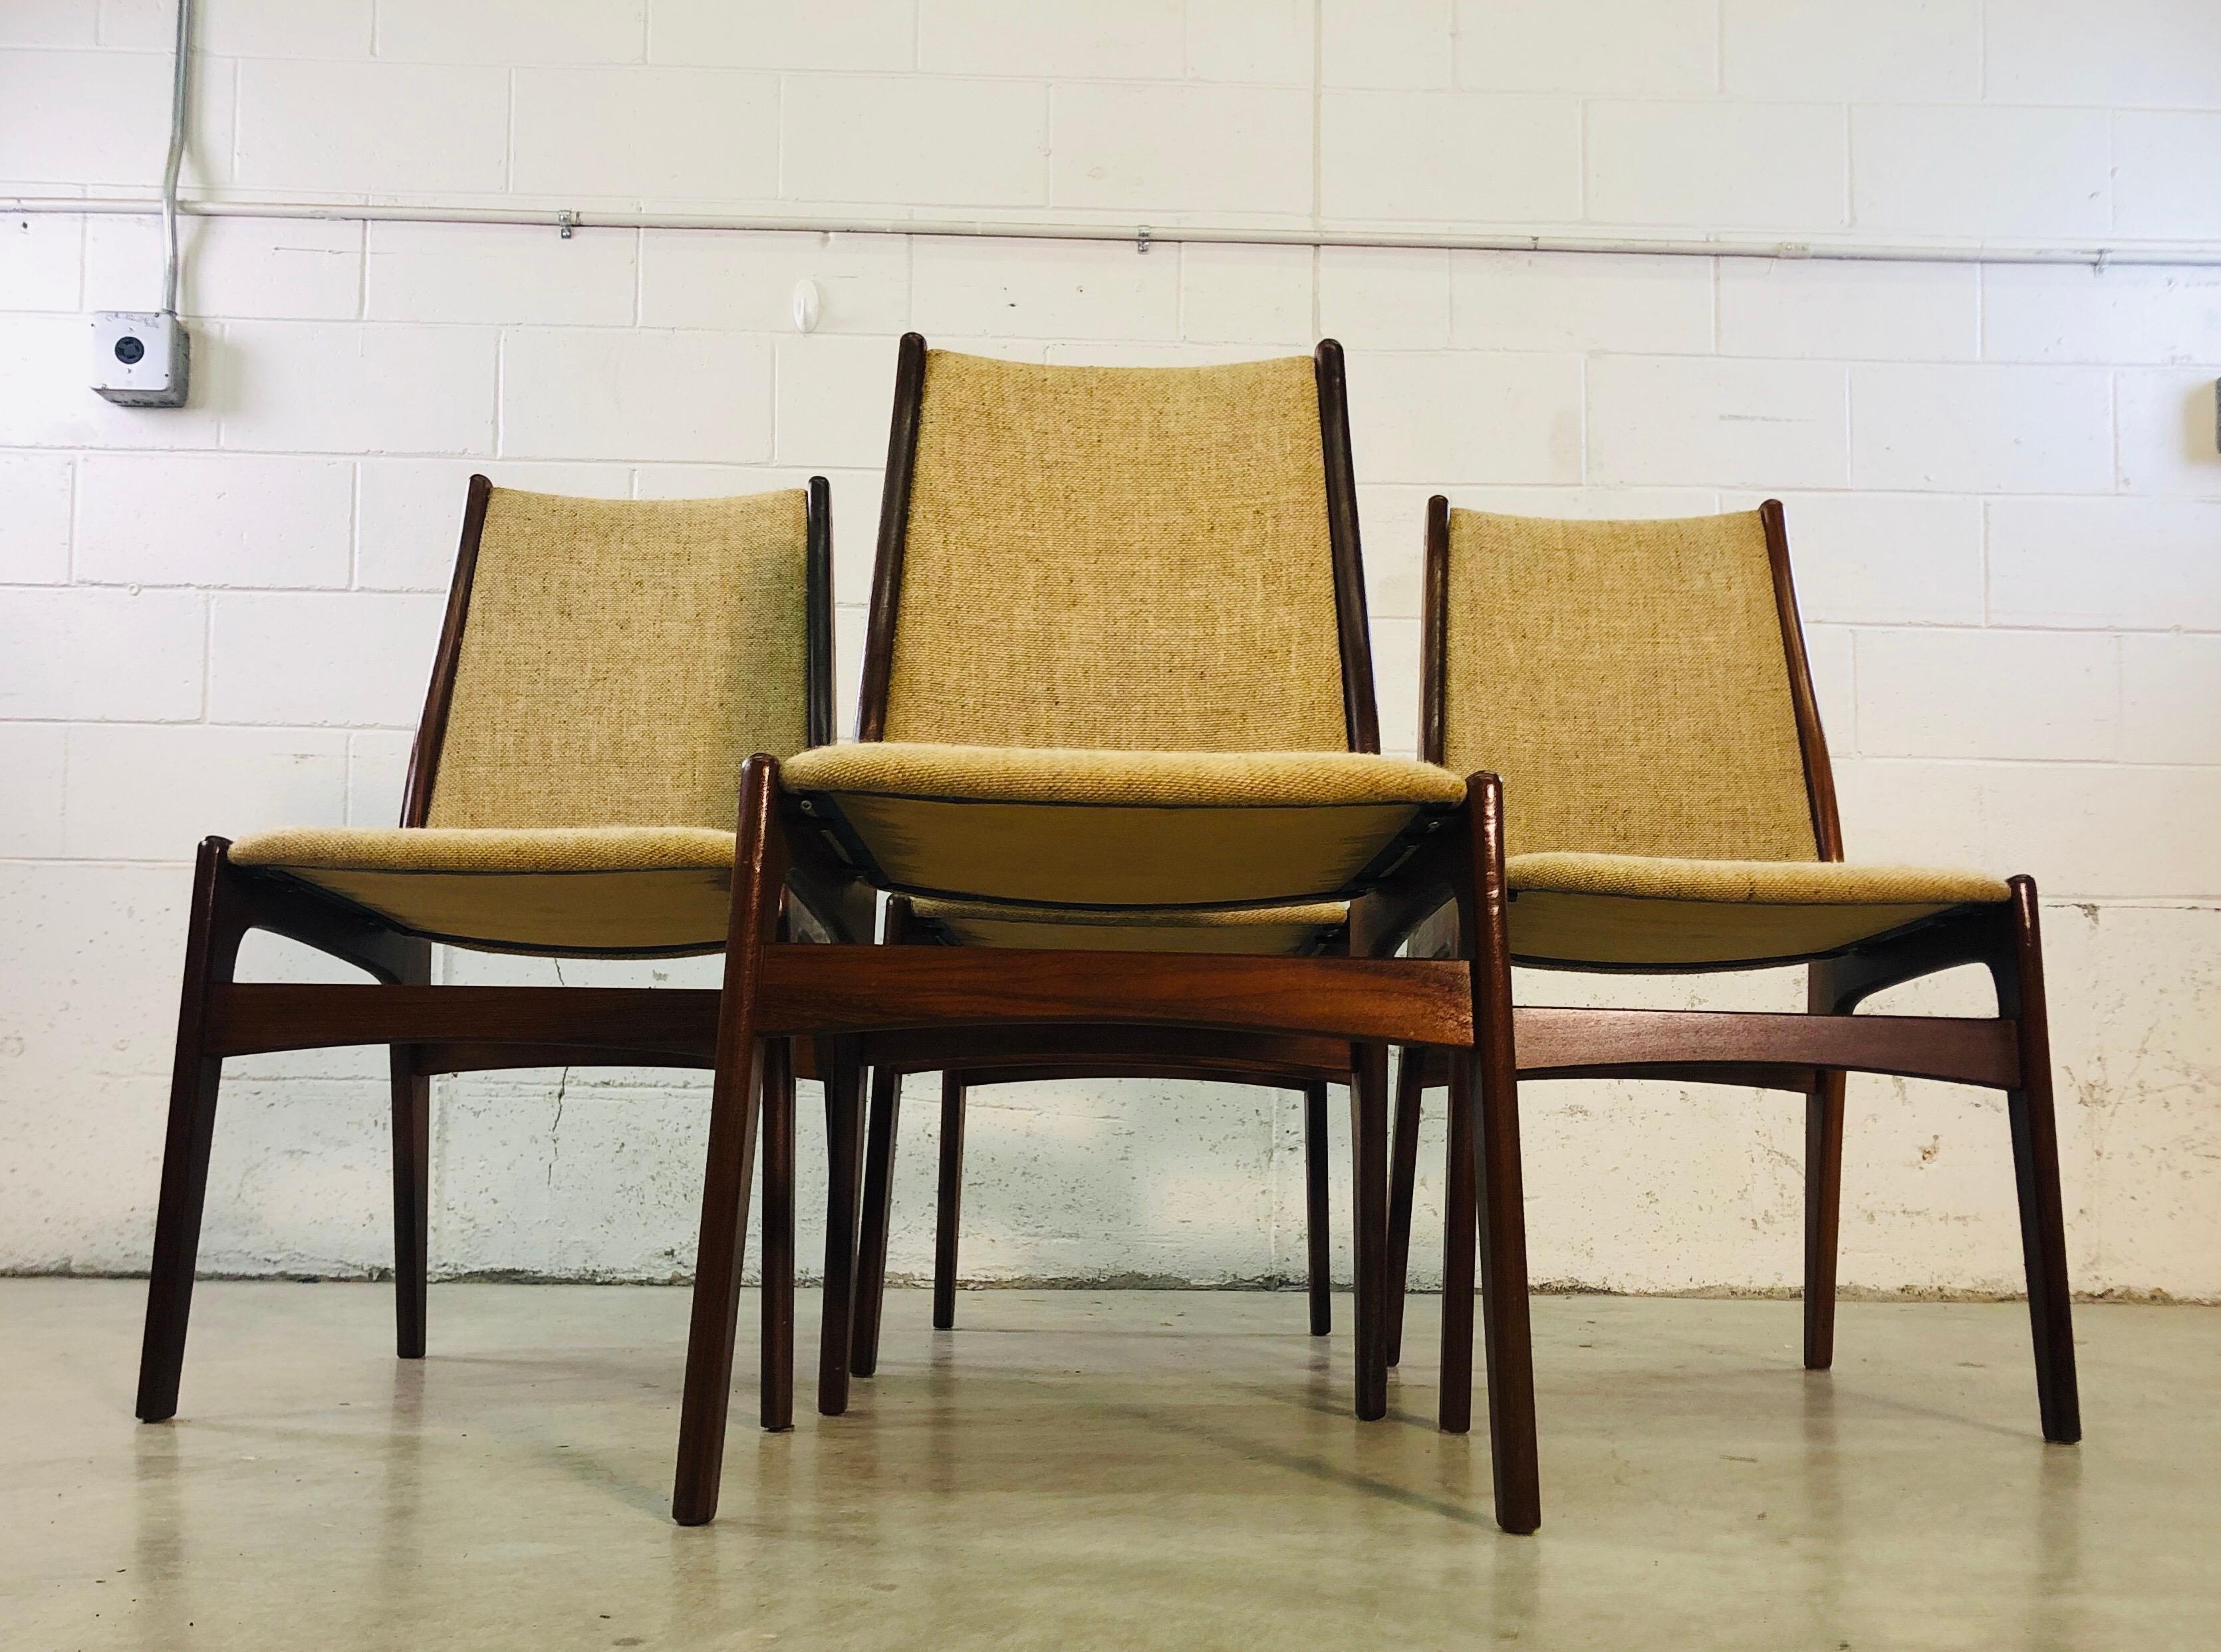 Vintage Danish teak dining room chairs designed by Johannes Andersen for Uldum Mobelfabrik. The chairs have the original tweed cloth upholstry. This is a set of 4, the chairs have all be restored and are sturdy. No marks. Very good condition.